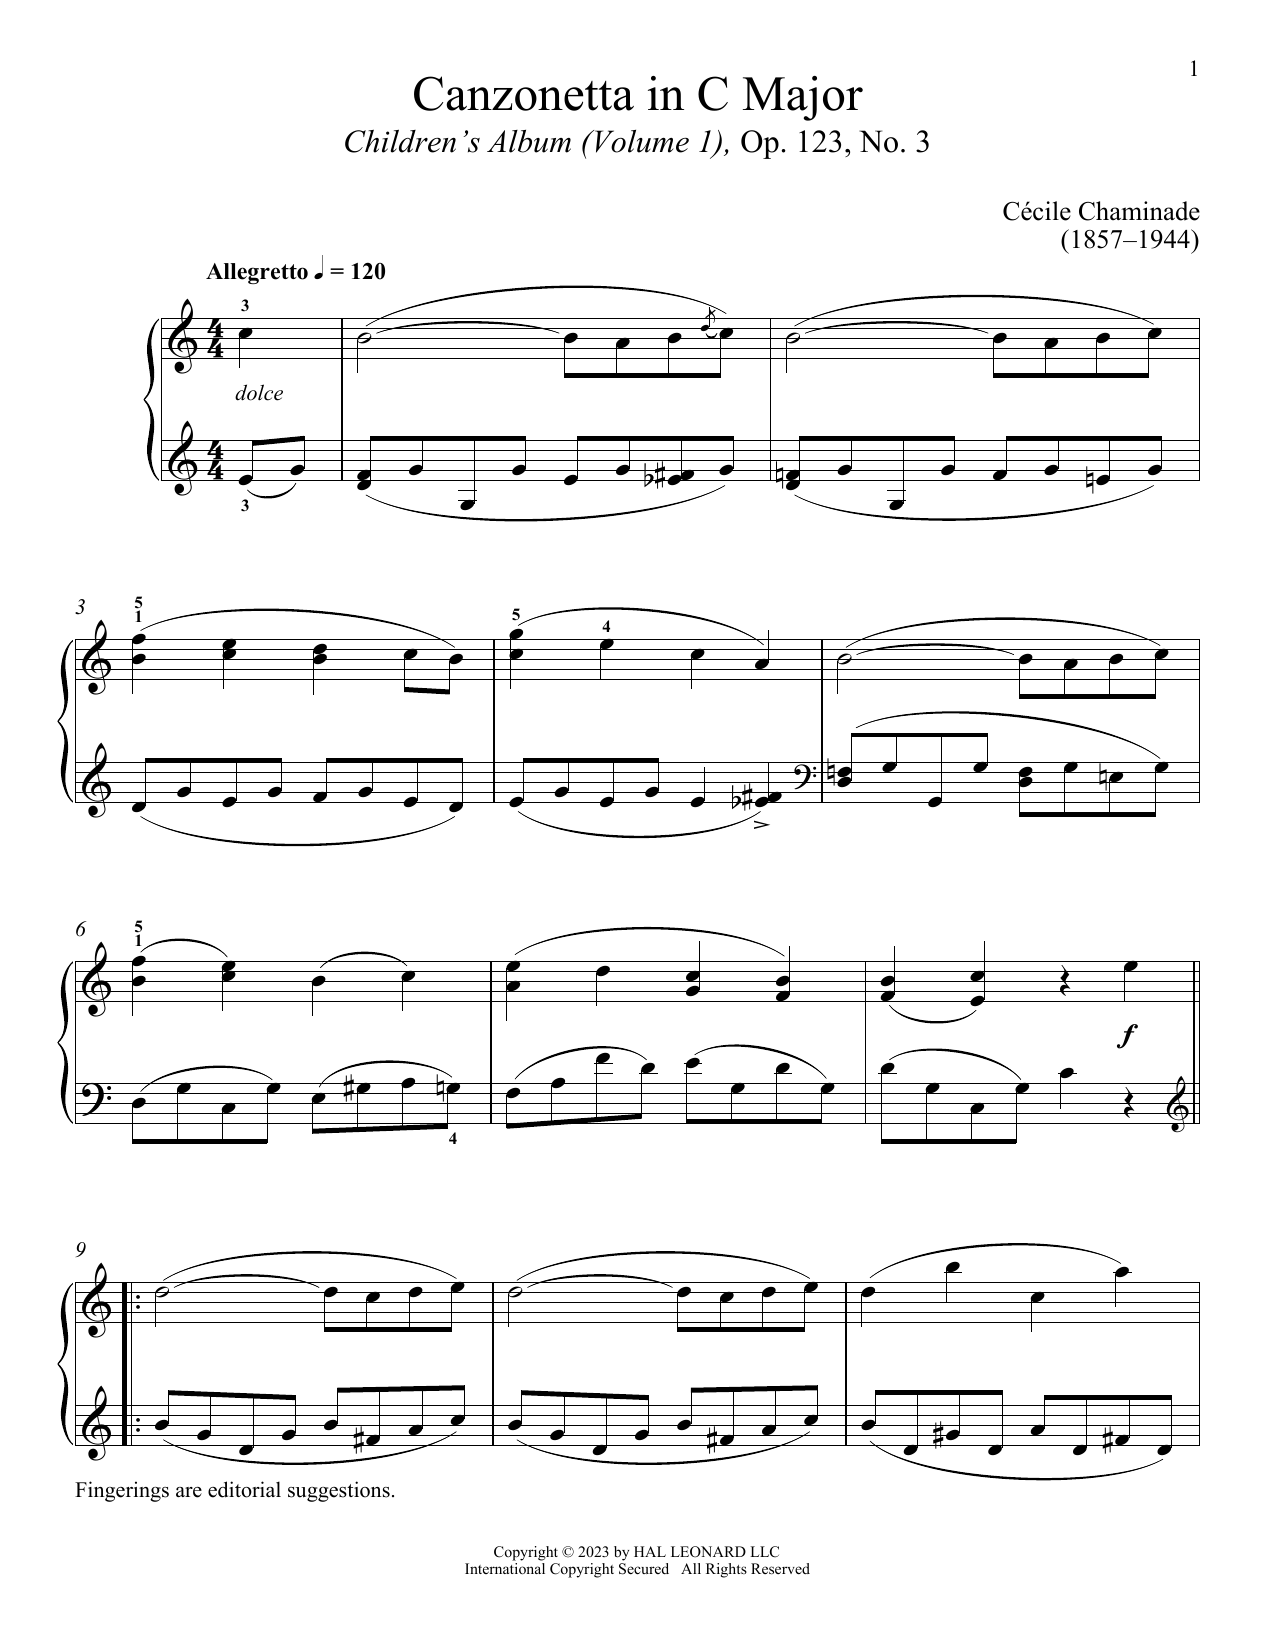 Download Cecile Chaminade Canzonetta Sheet Music